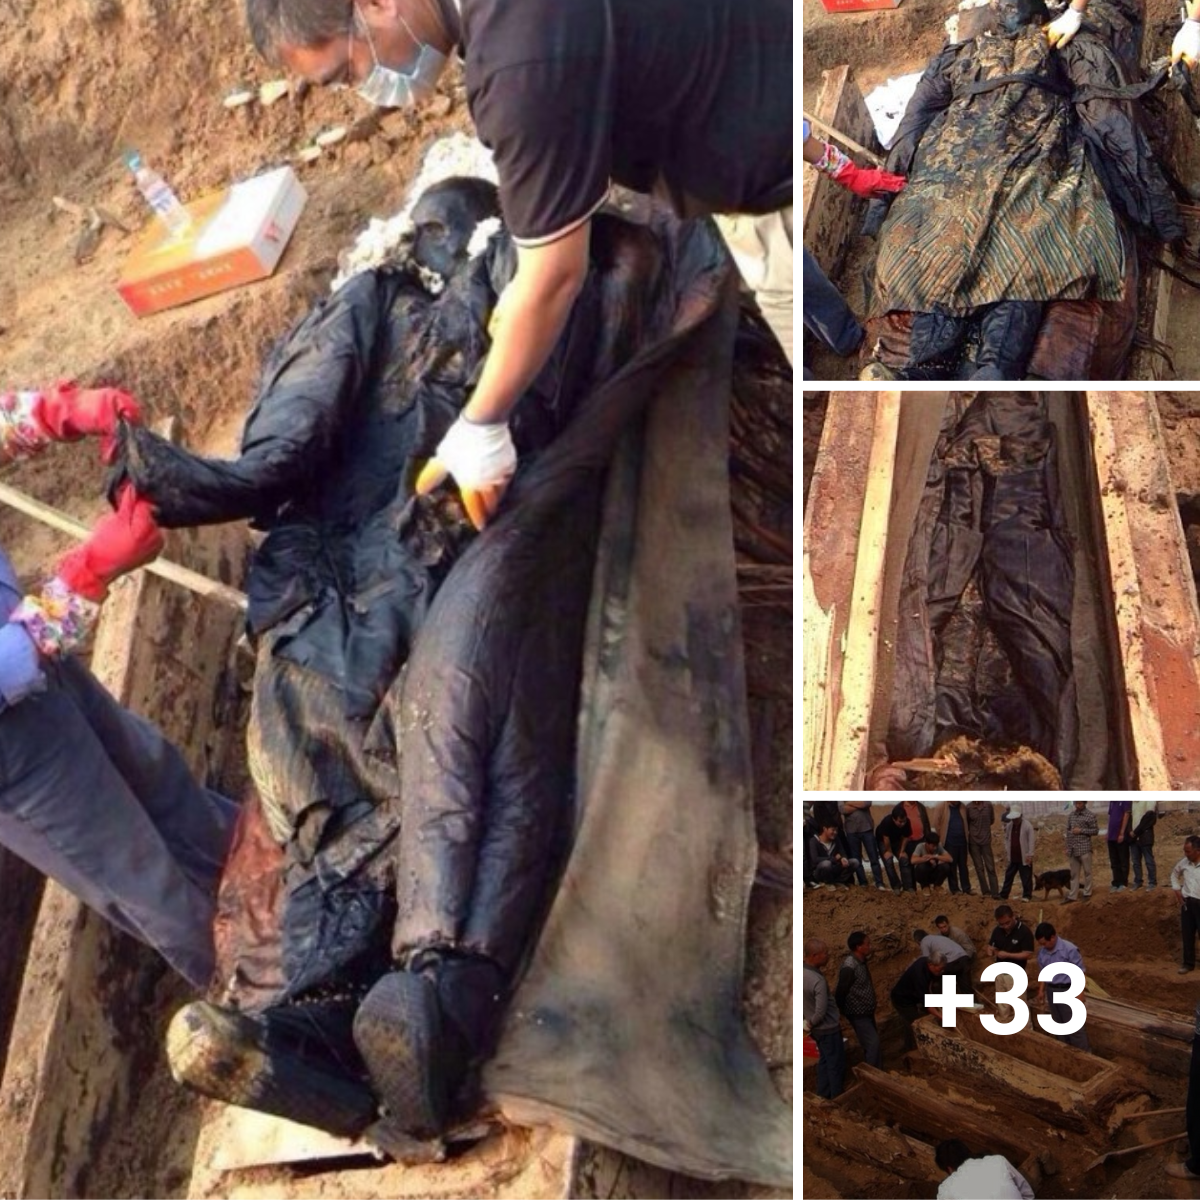 In the Central Chinese province of Henan, the naturally mummified remains of a government official from the Qing Dynasty (1644–1912) were discovered during construction.